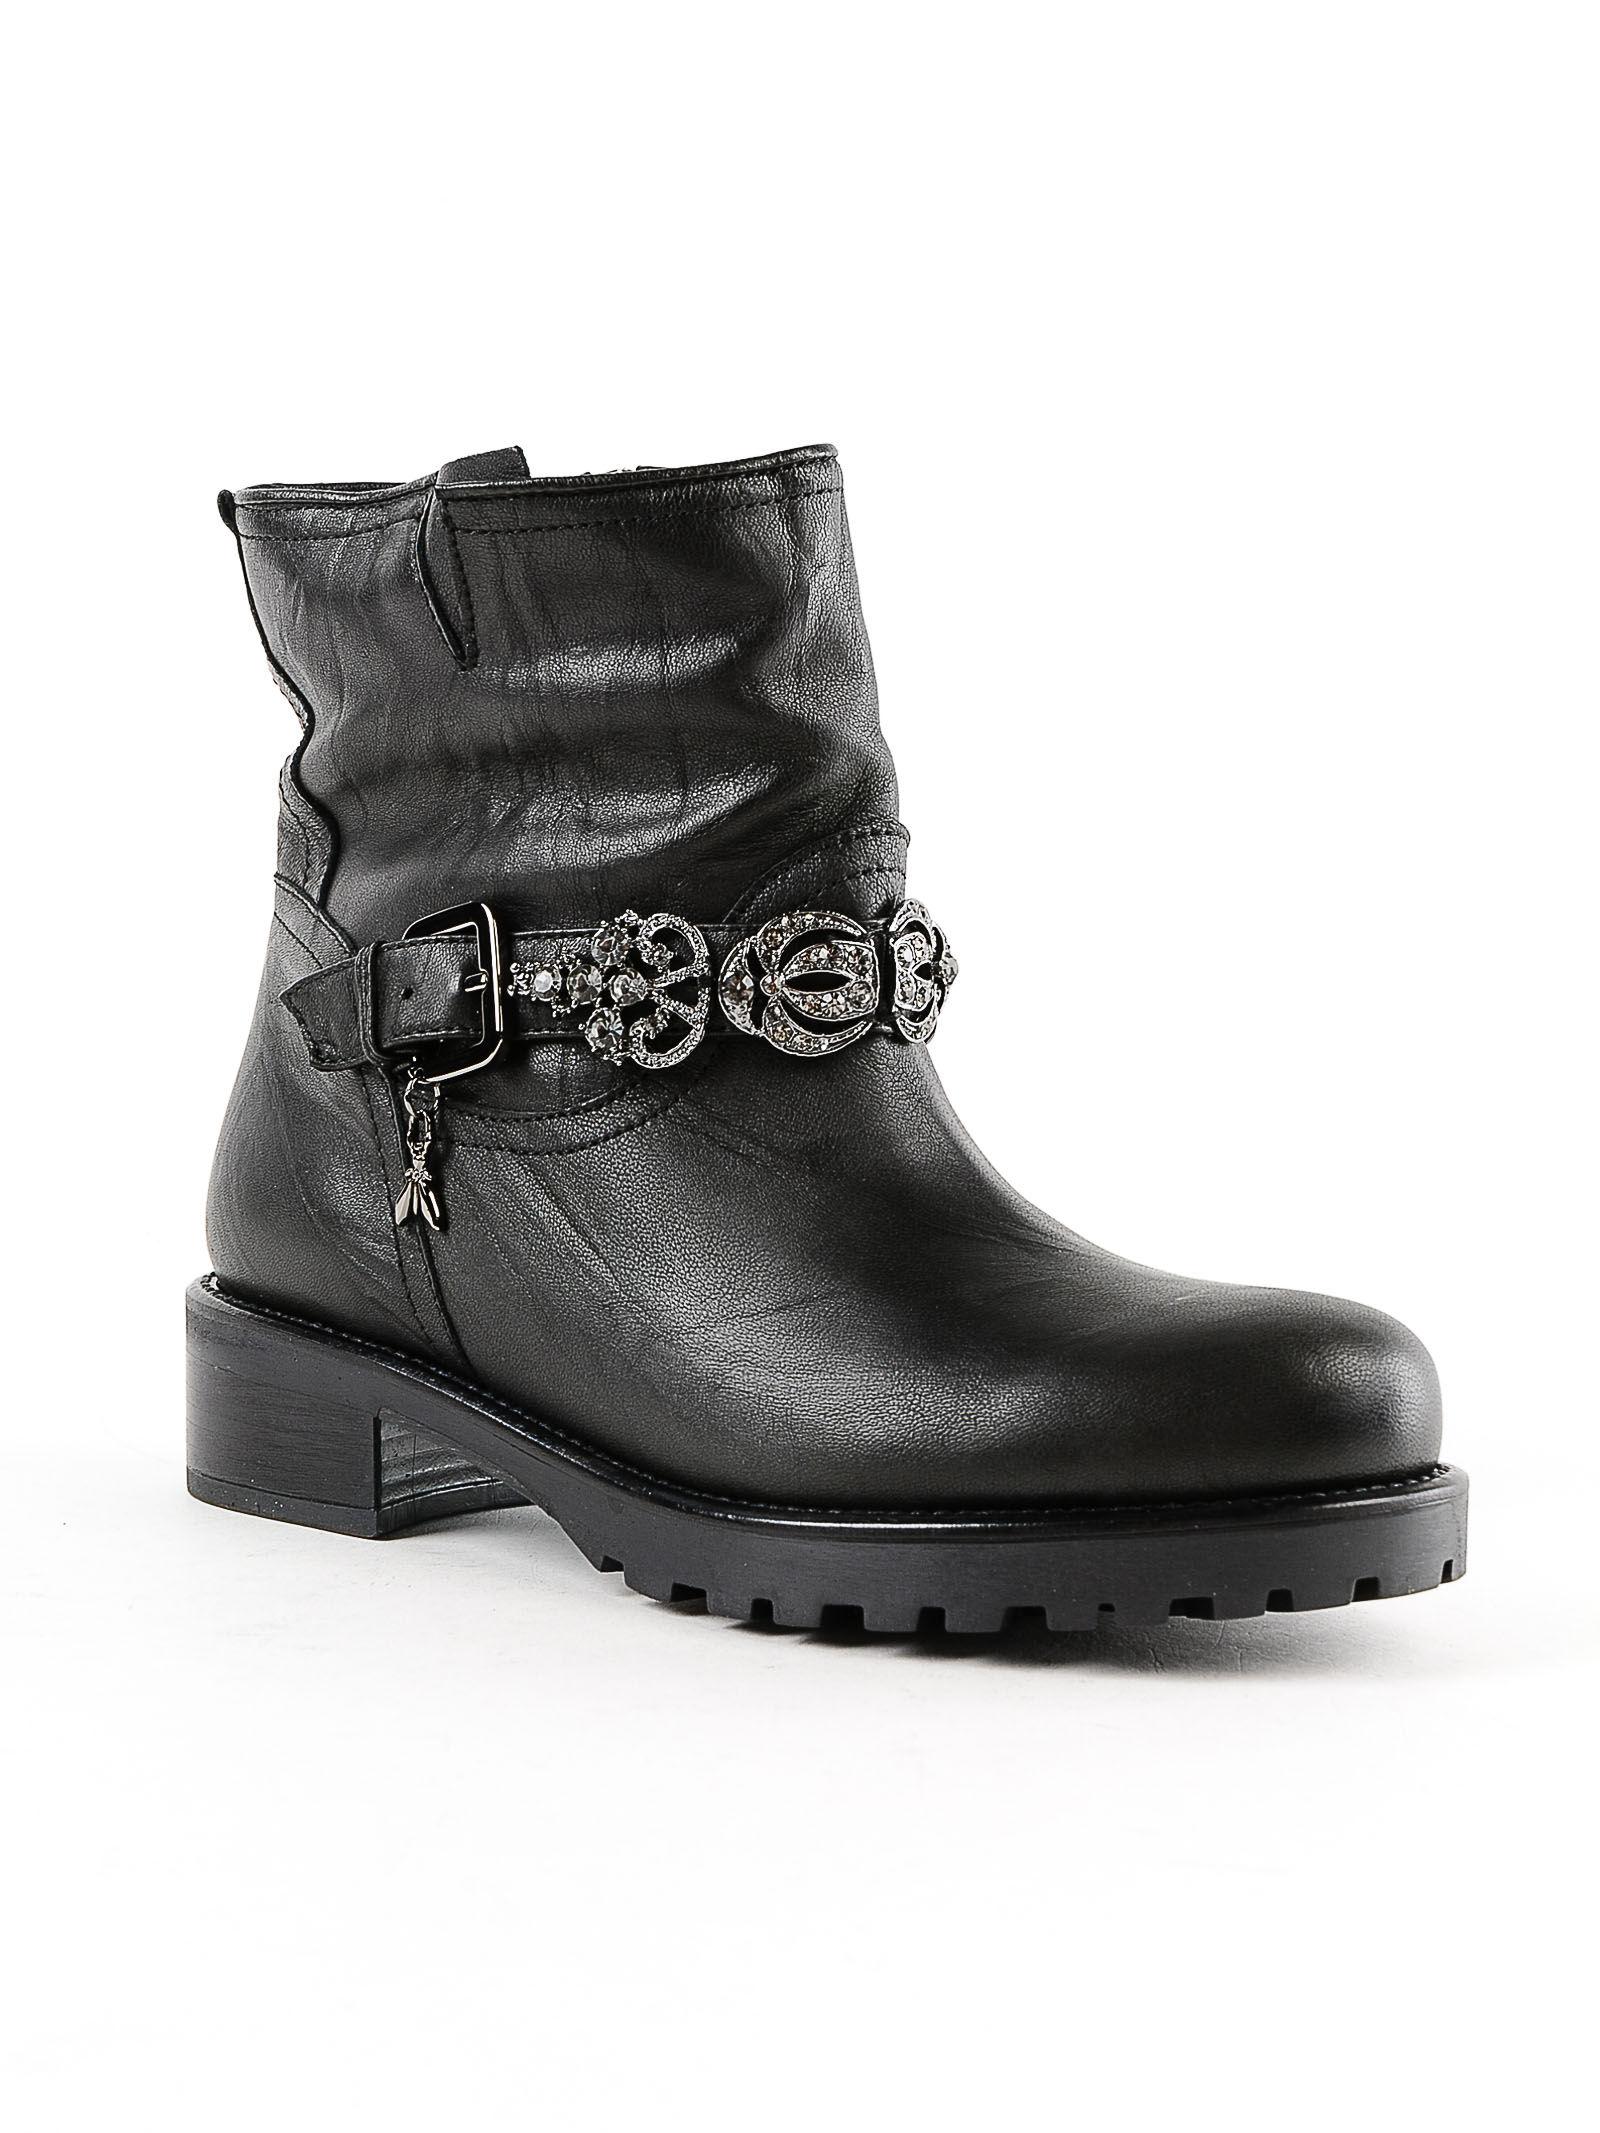 Patrizia Pepe Leather Embellished Buckle Strap Ankle Boots in Black - Lyst